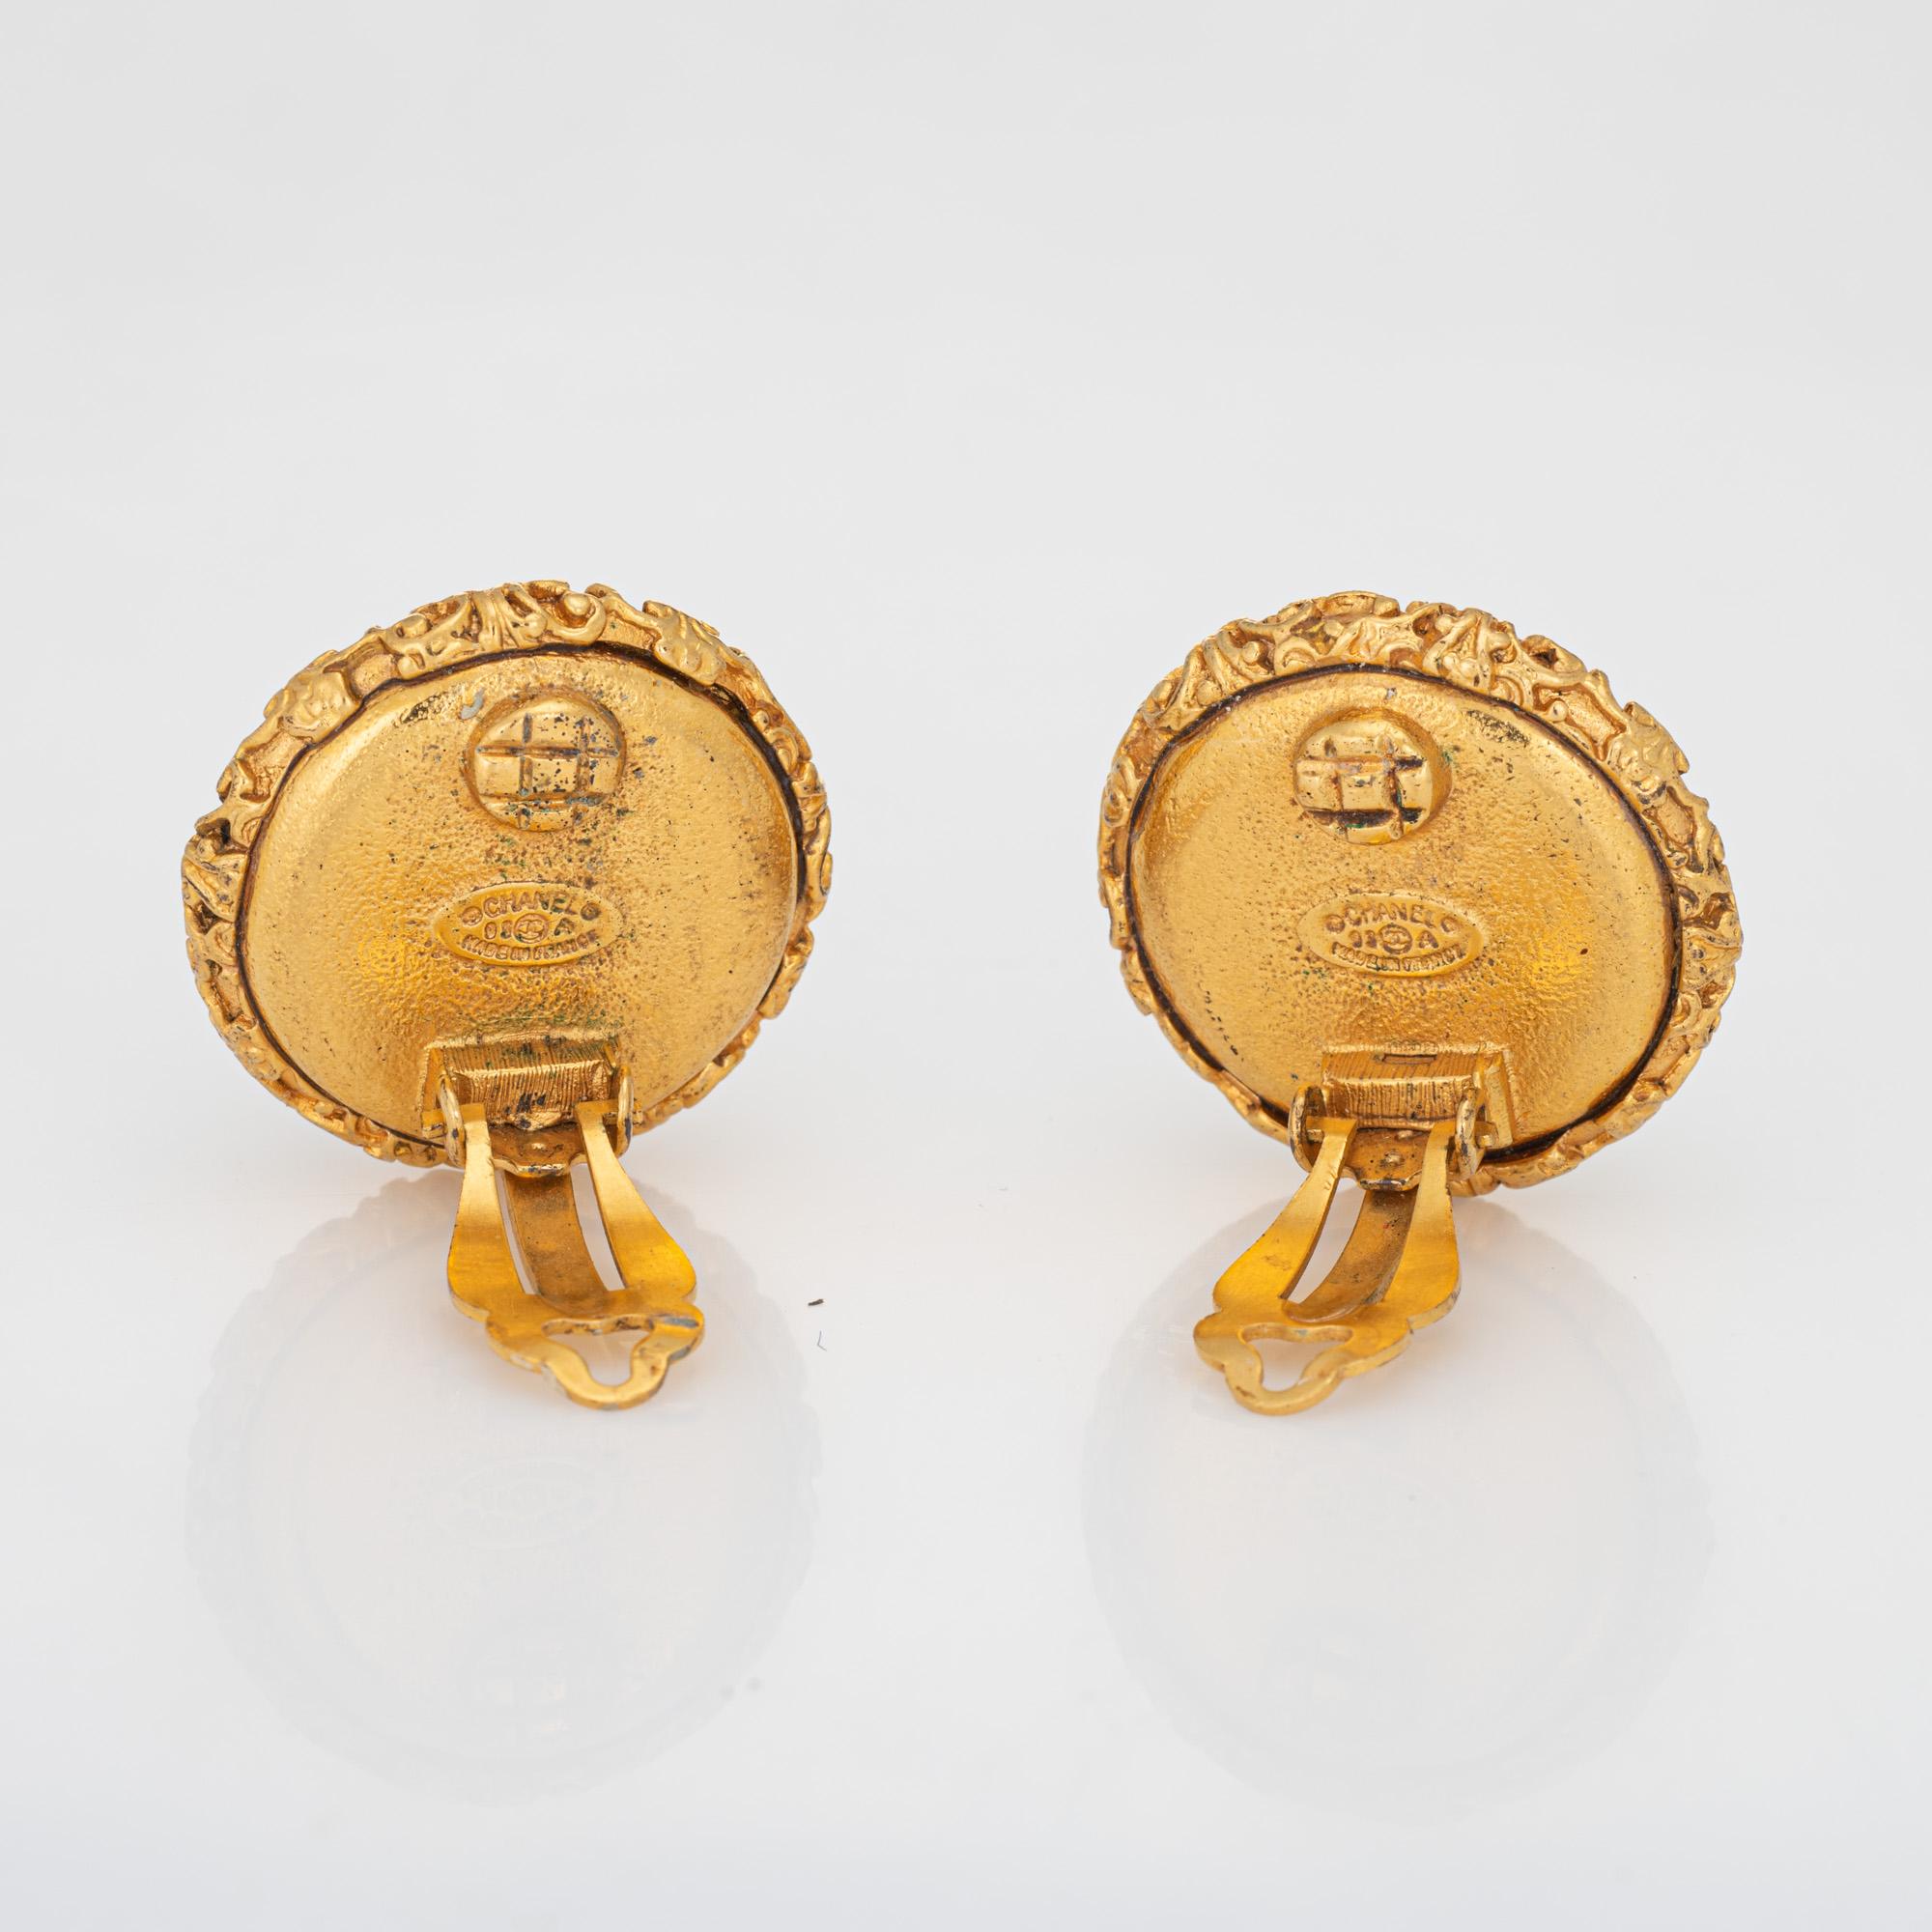 Vintage Chanel large round clip on CC logo nugget earrings crafted in yellow gold tone (circa 2003).

The earrings feature the CC logo to the center with ornate textured nugget detail and faux pearls to the base. The earrings are fitted with clip on